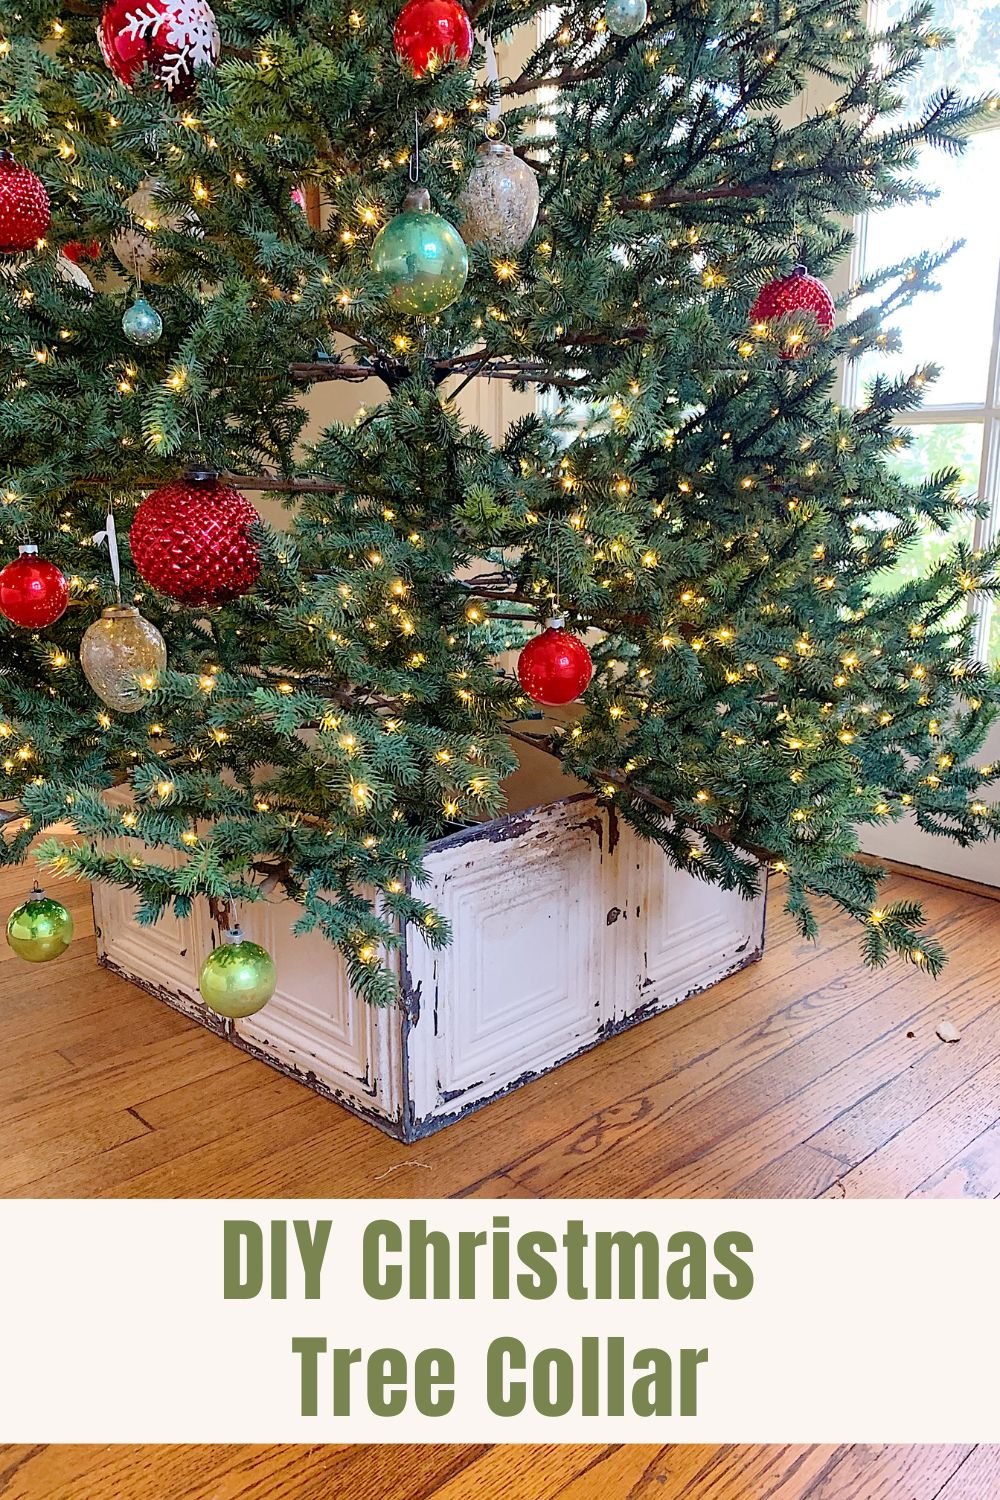 I love DIYs and have always wanted to make a Christmas Tree Collar. I can't wait to share how I made this for our Christmas tree!